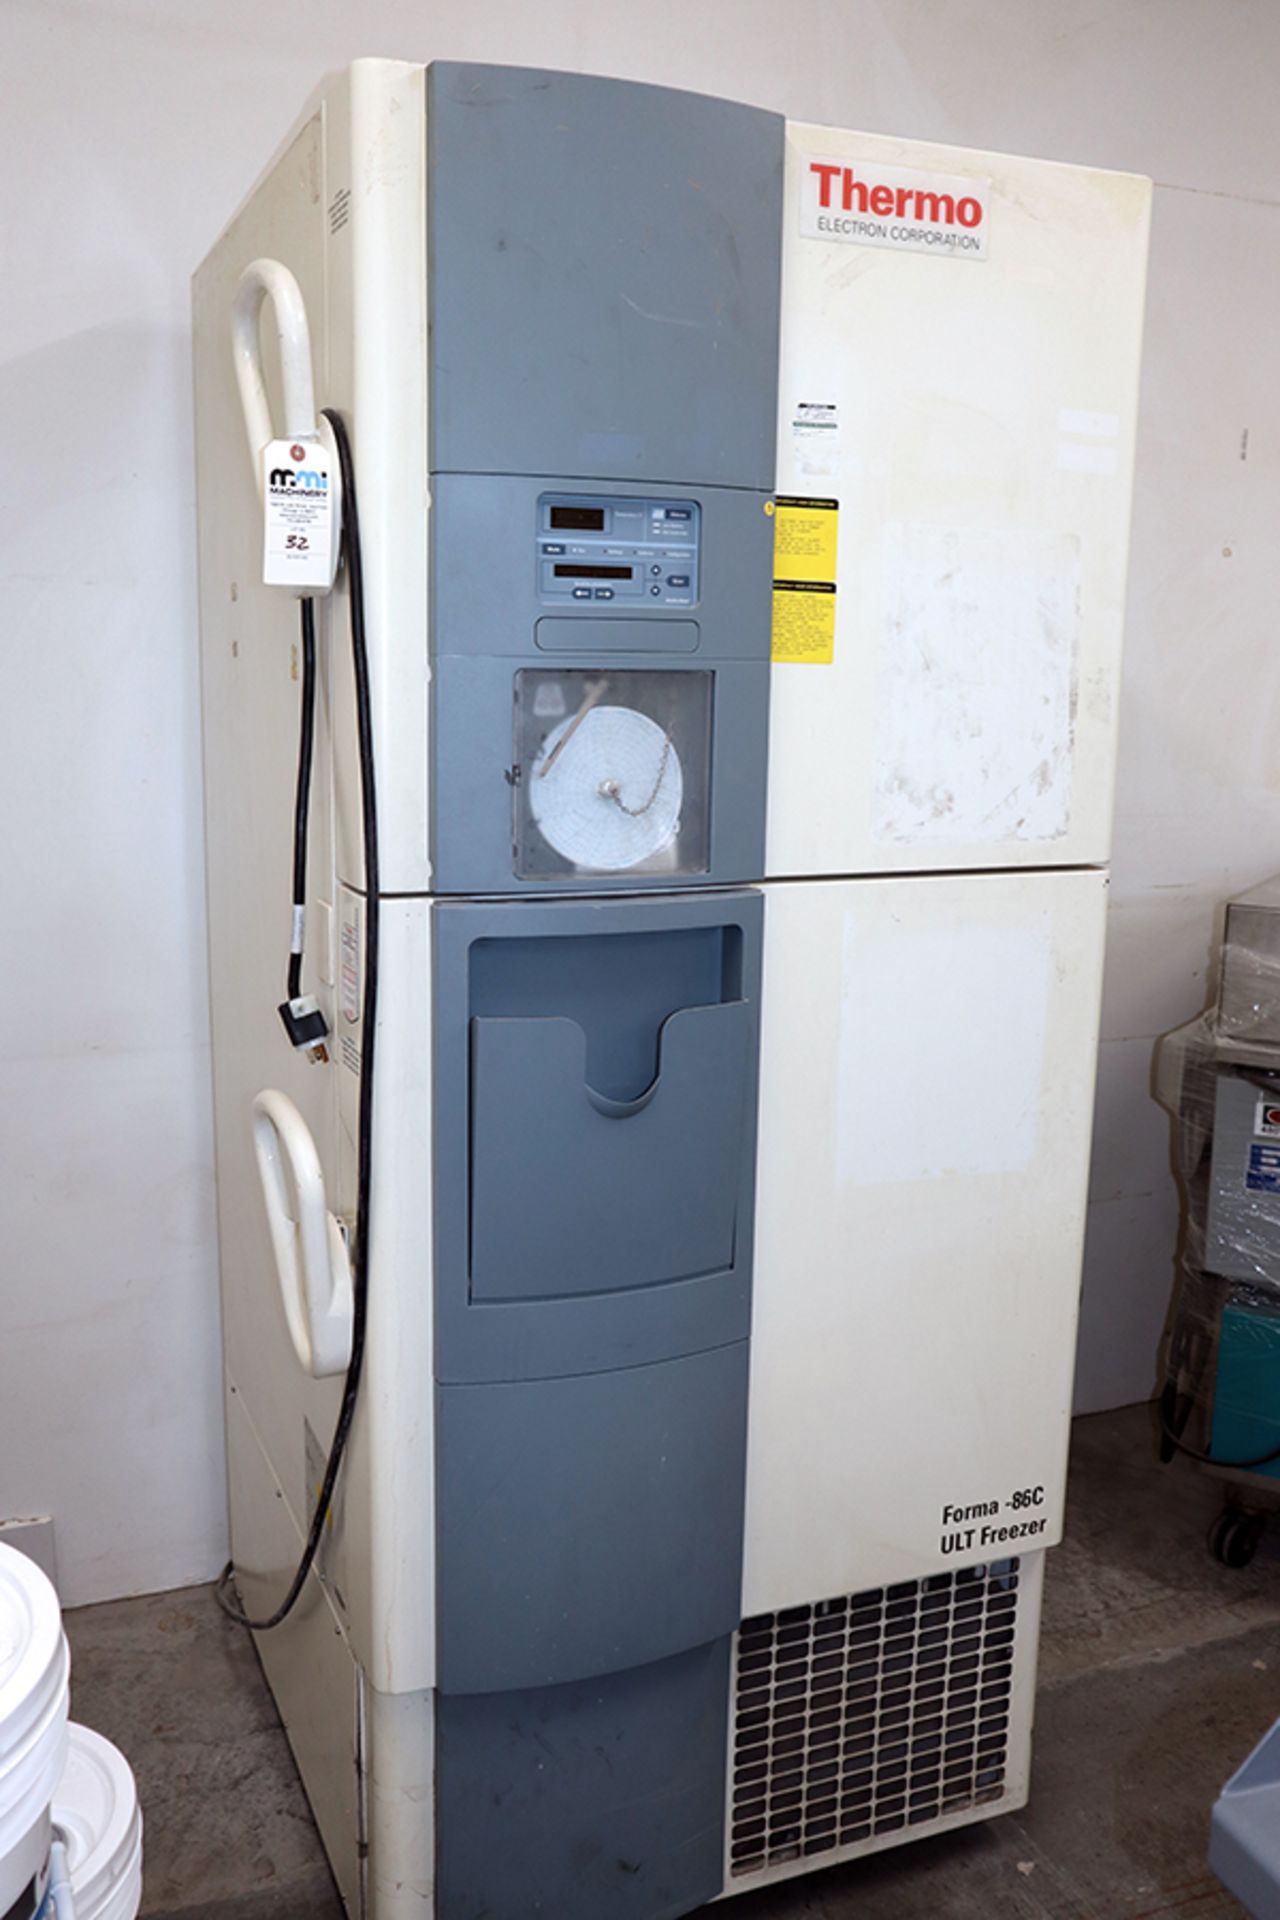 Thermo Electron Corporation Forma 8693 -86C ULT Lab Freezer - Image 3 of 11